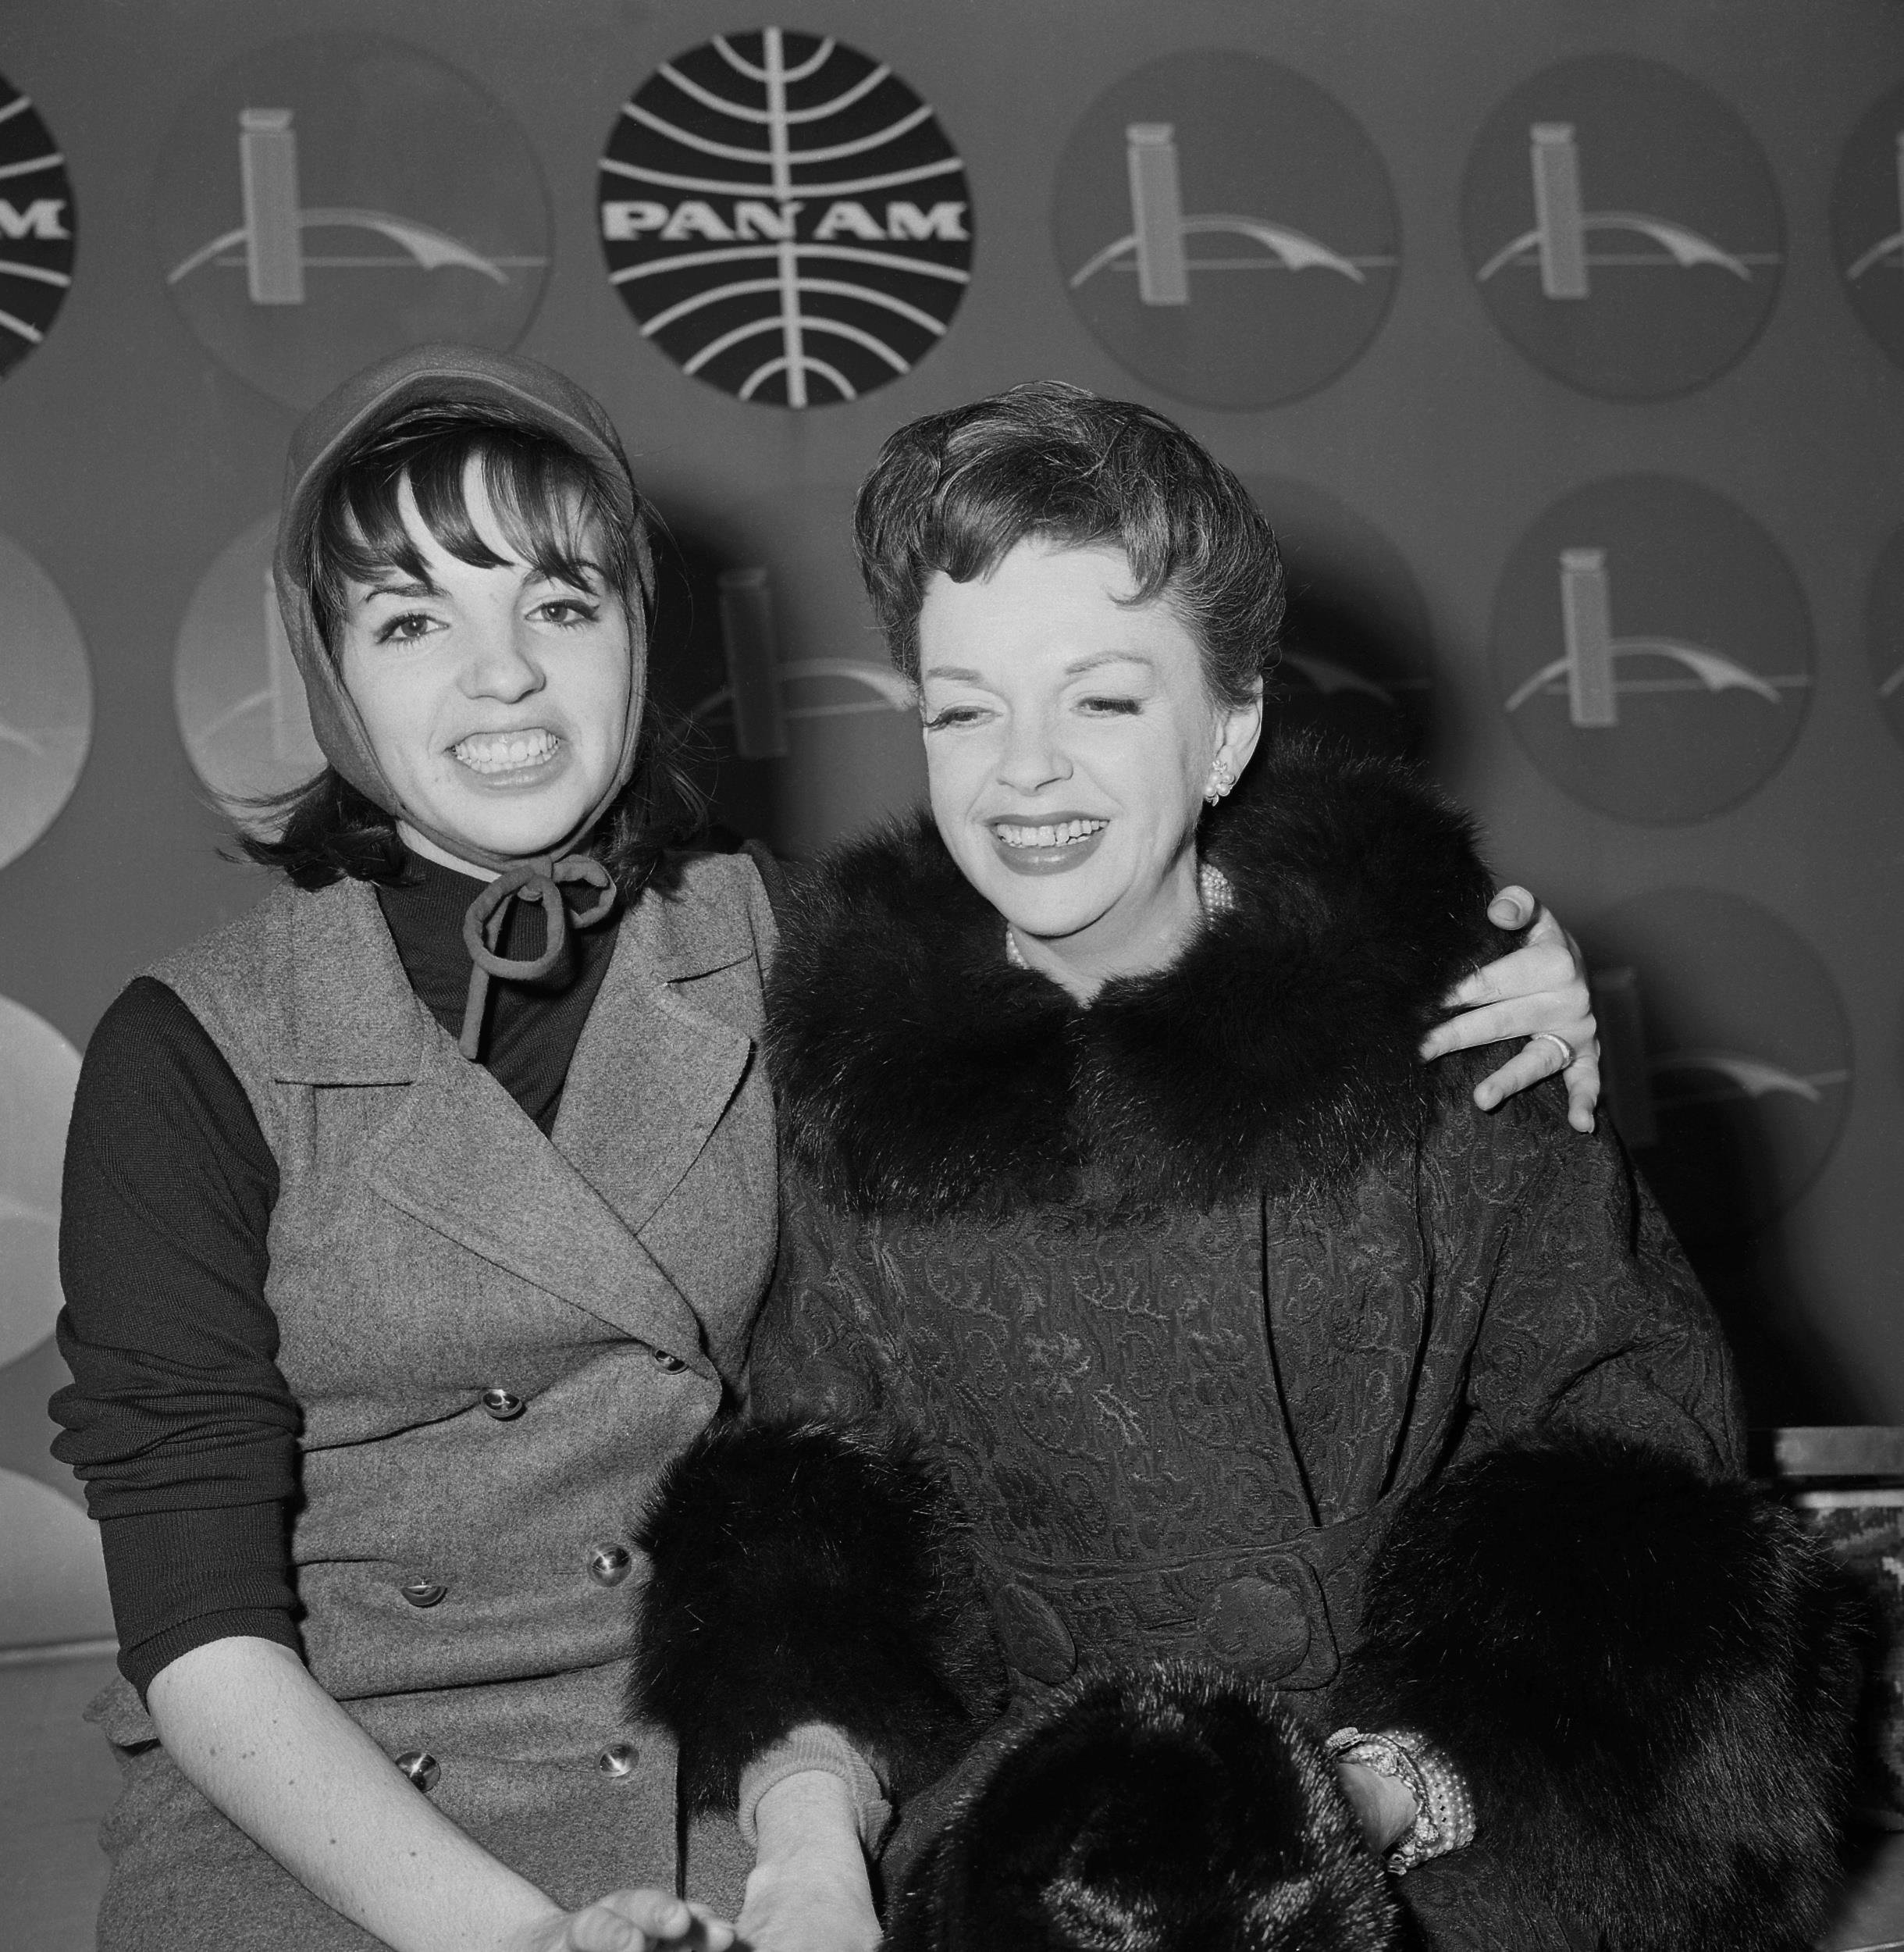 <p>Is there a more famous Hollywood mother-daughter tandem than the legendary Judy Garland (<em><span>The Wizard of Oz</span></em><span>) and Liza Minnelli (<em>Cabaret</em>)? Despite all the issues in her personal life, Garland was one of the most beloved entertainers in the history of the business, while Minnelli is among the most versatile and almost even more beloved in certain fandom circles. </span></p><p><a href='https://www.msn.com/en-us/community/channel/vid-cj9pqbr0vn9in2b6ddcd8sfgpfq6x6utp44fssrv6mc2gtybw0us'>Follow us on MSN to see more of our exclusive entertainment content.</a></p>